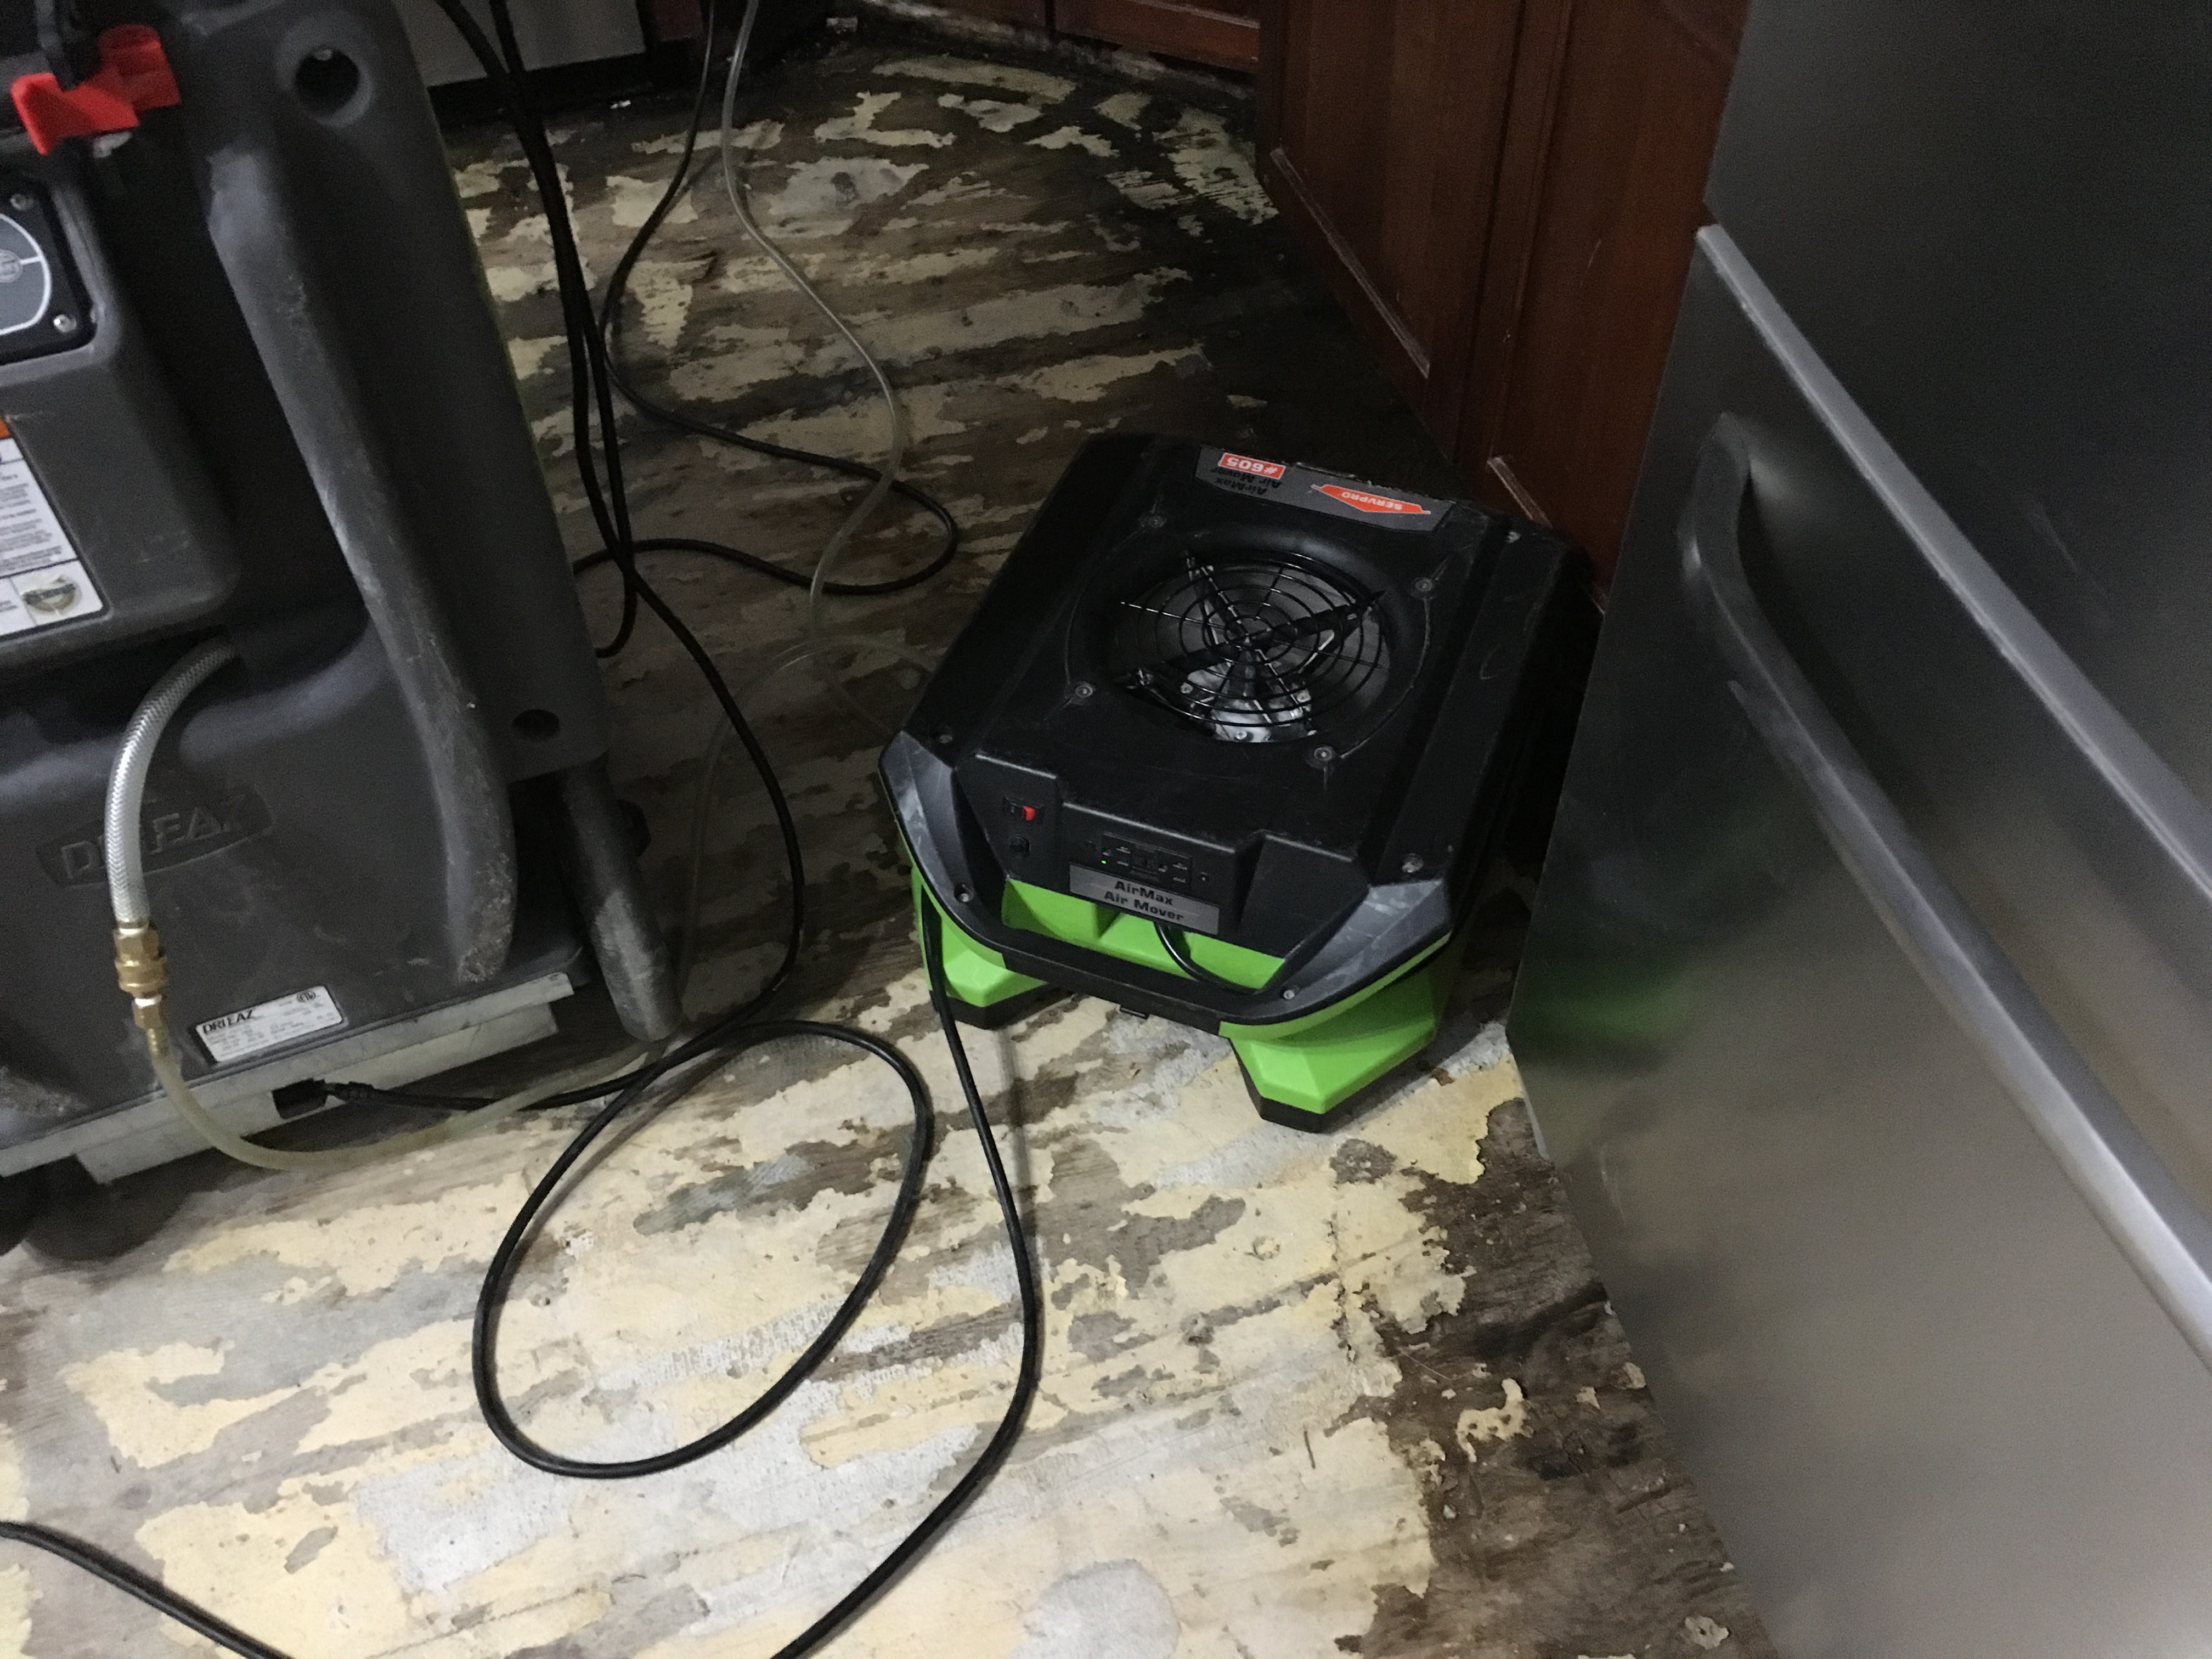 Water damage turned into mold damage in this home.